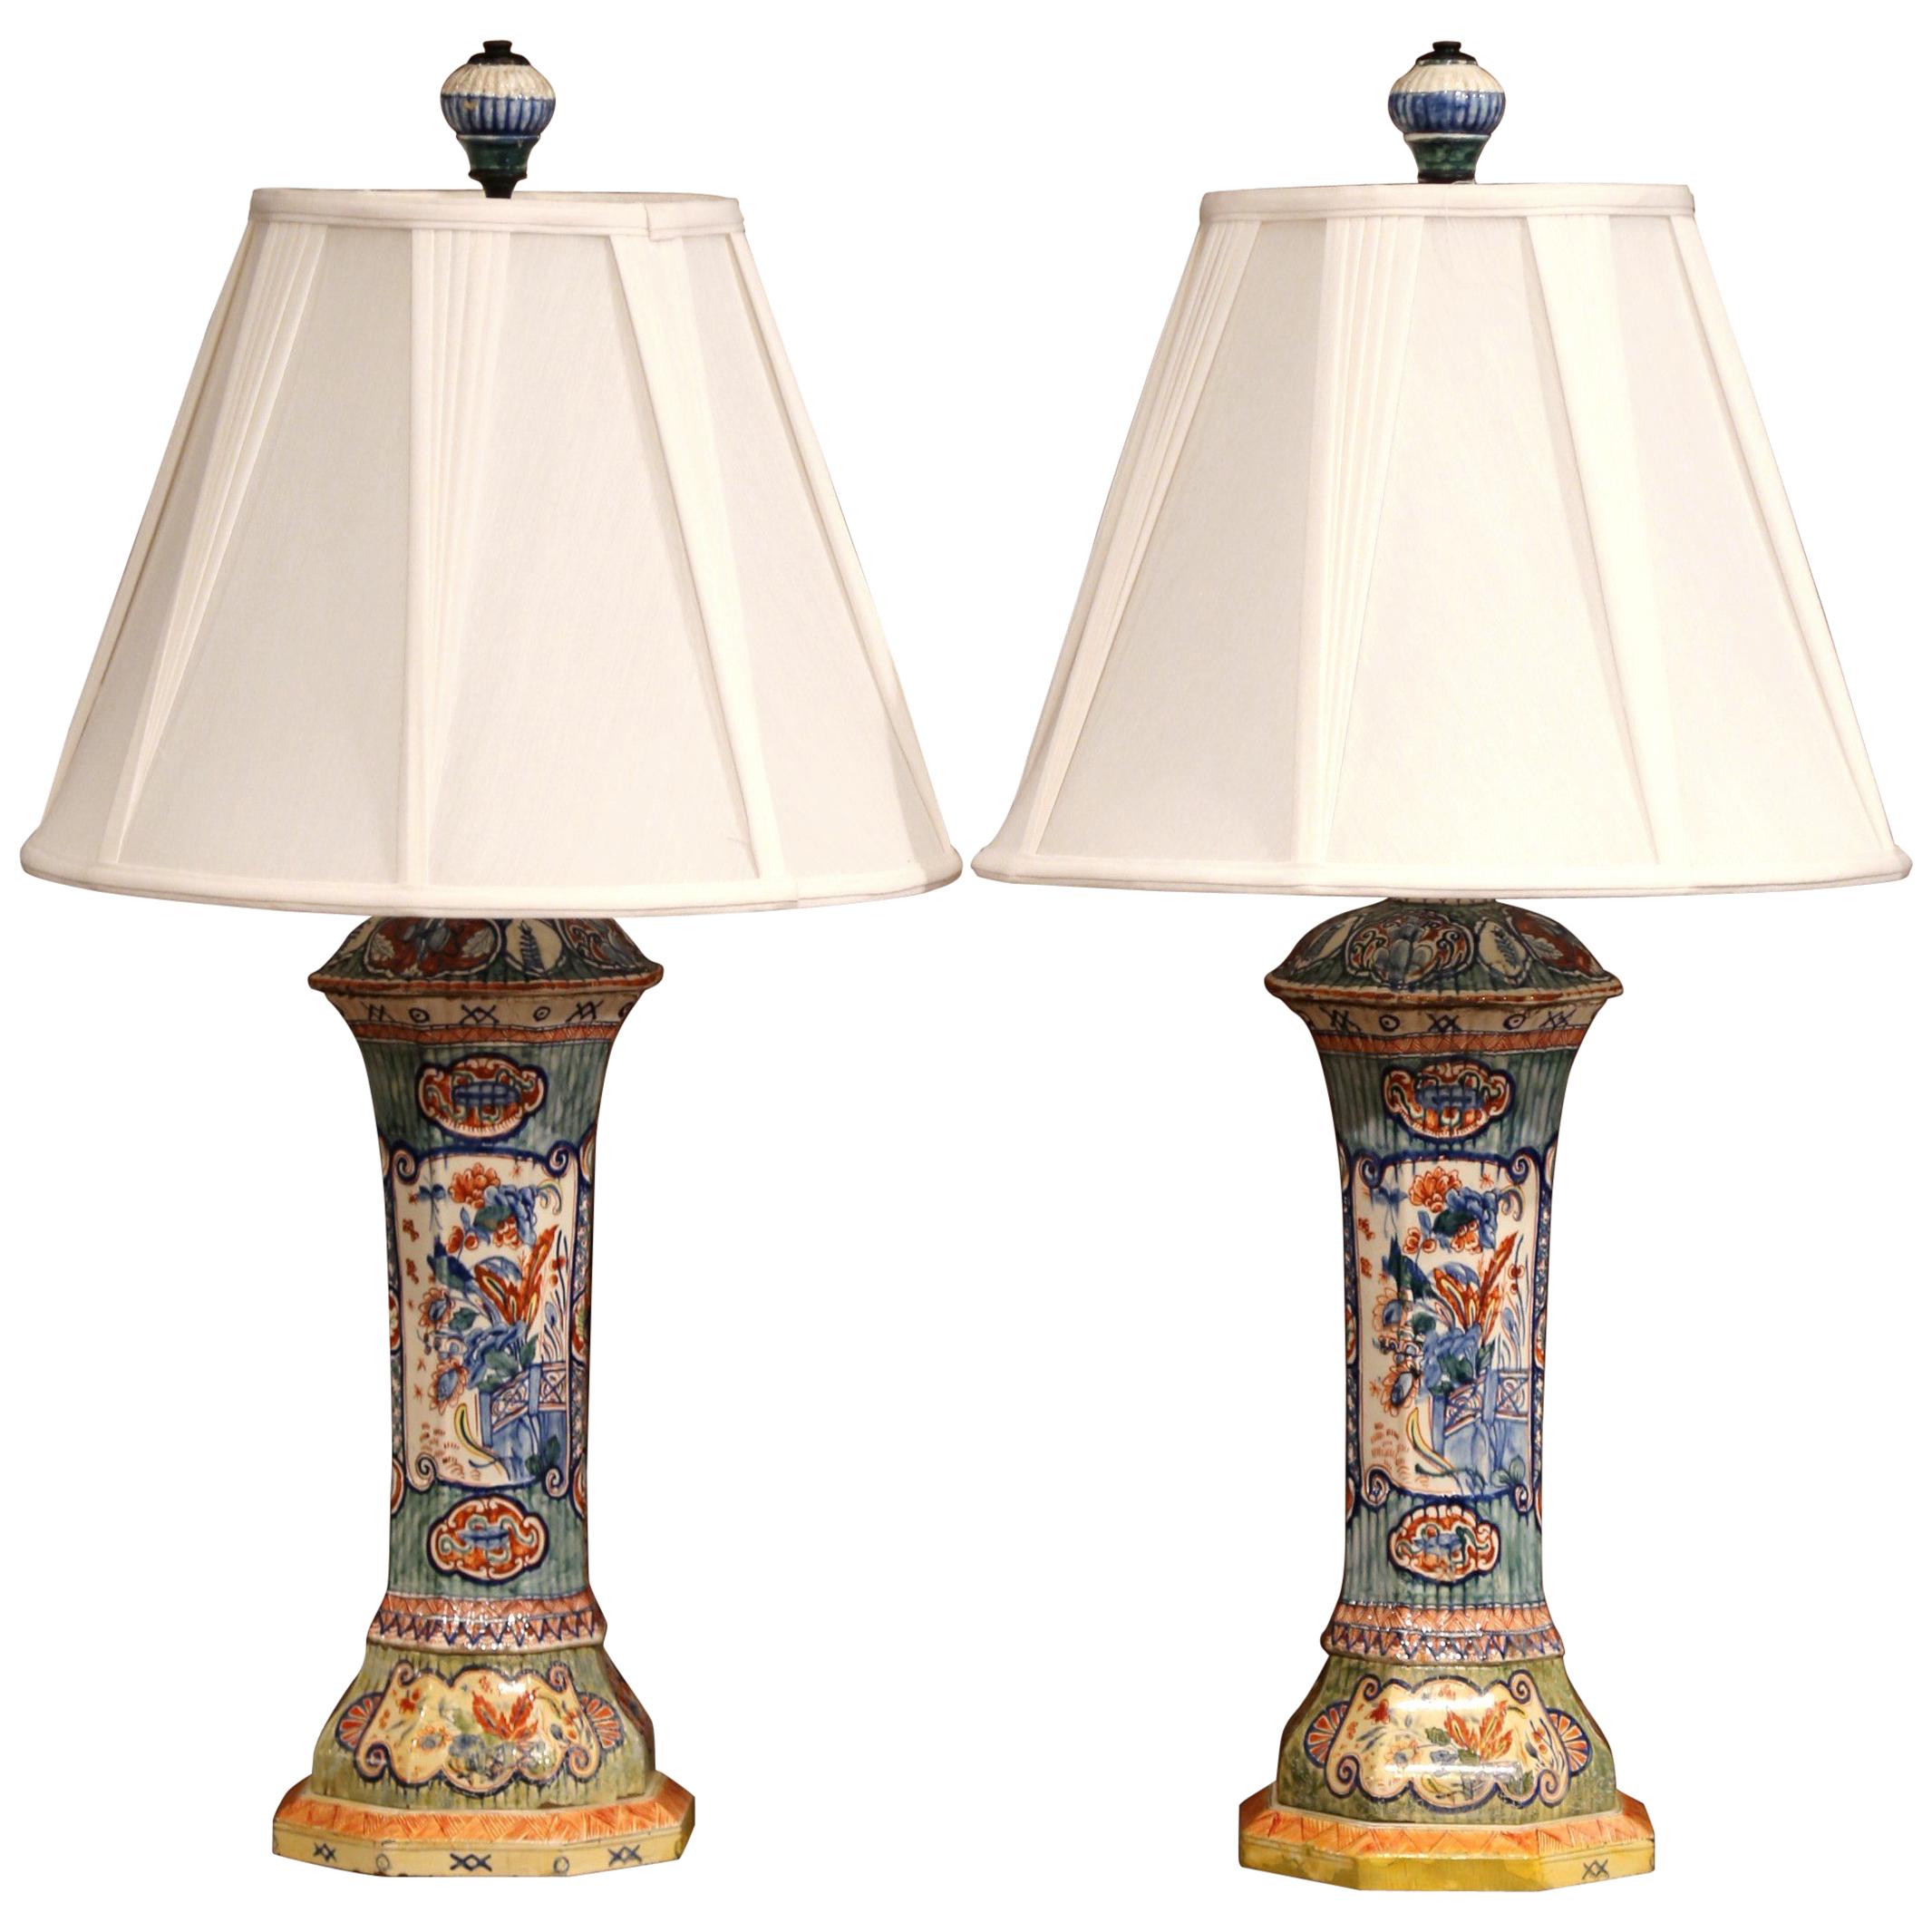 Pair of 19th Century French Porcelain Hand Painted Vases Fitted into Table Lamps